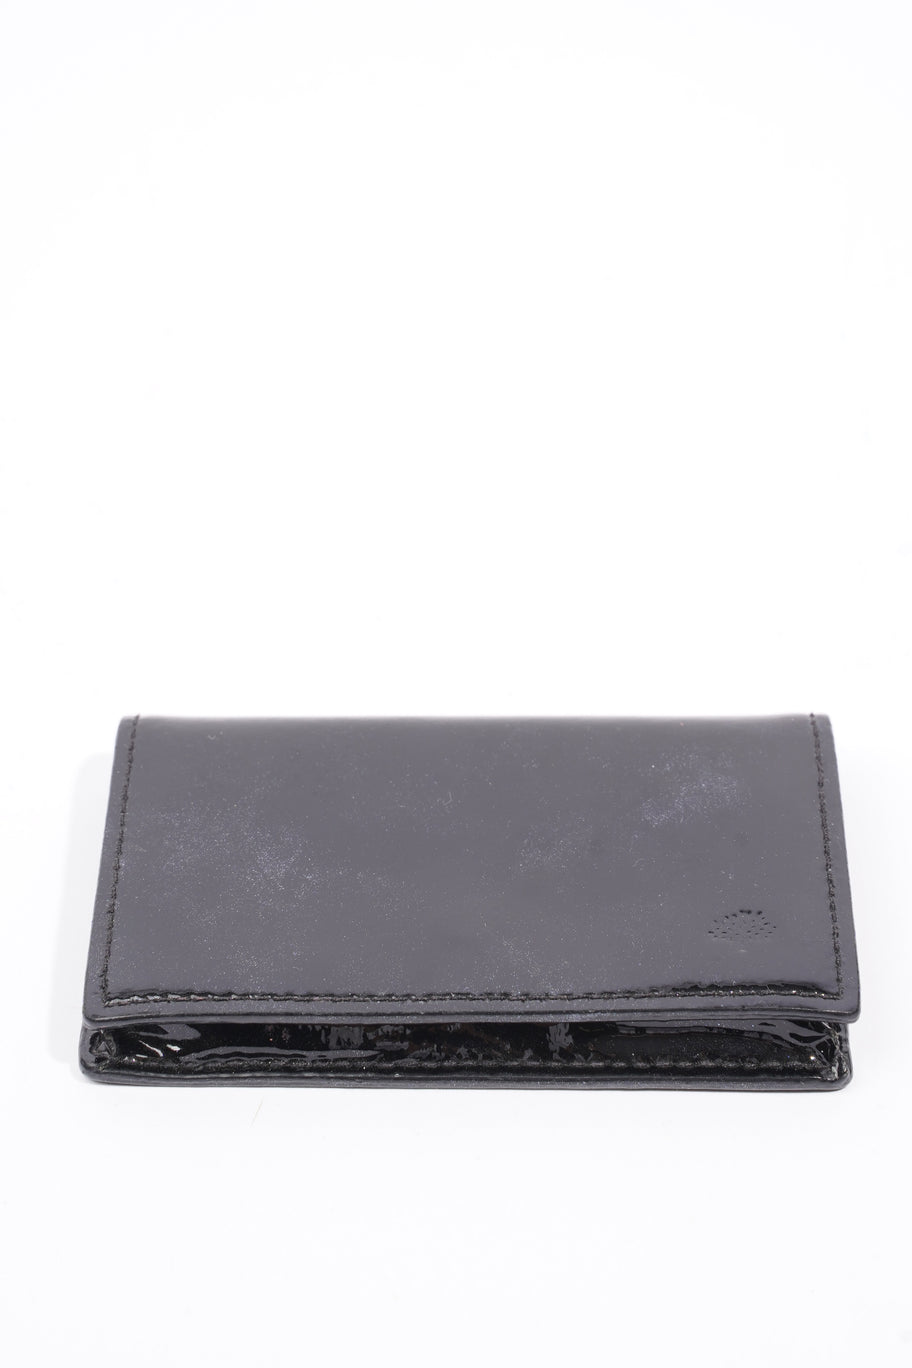 Coin Wallet Black Patent Leather Image 3